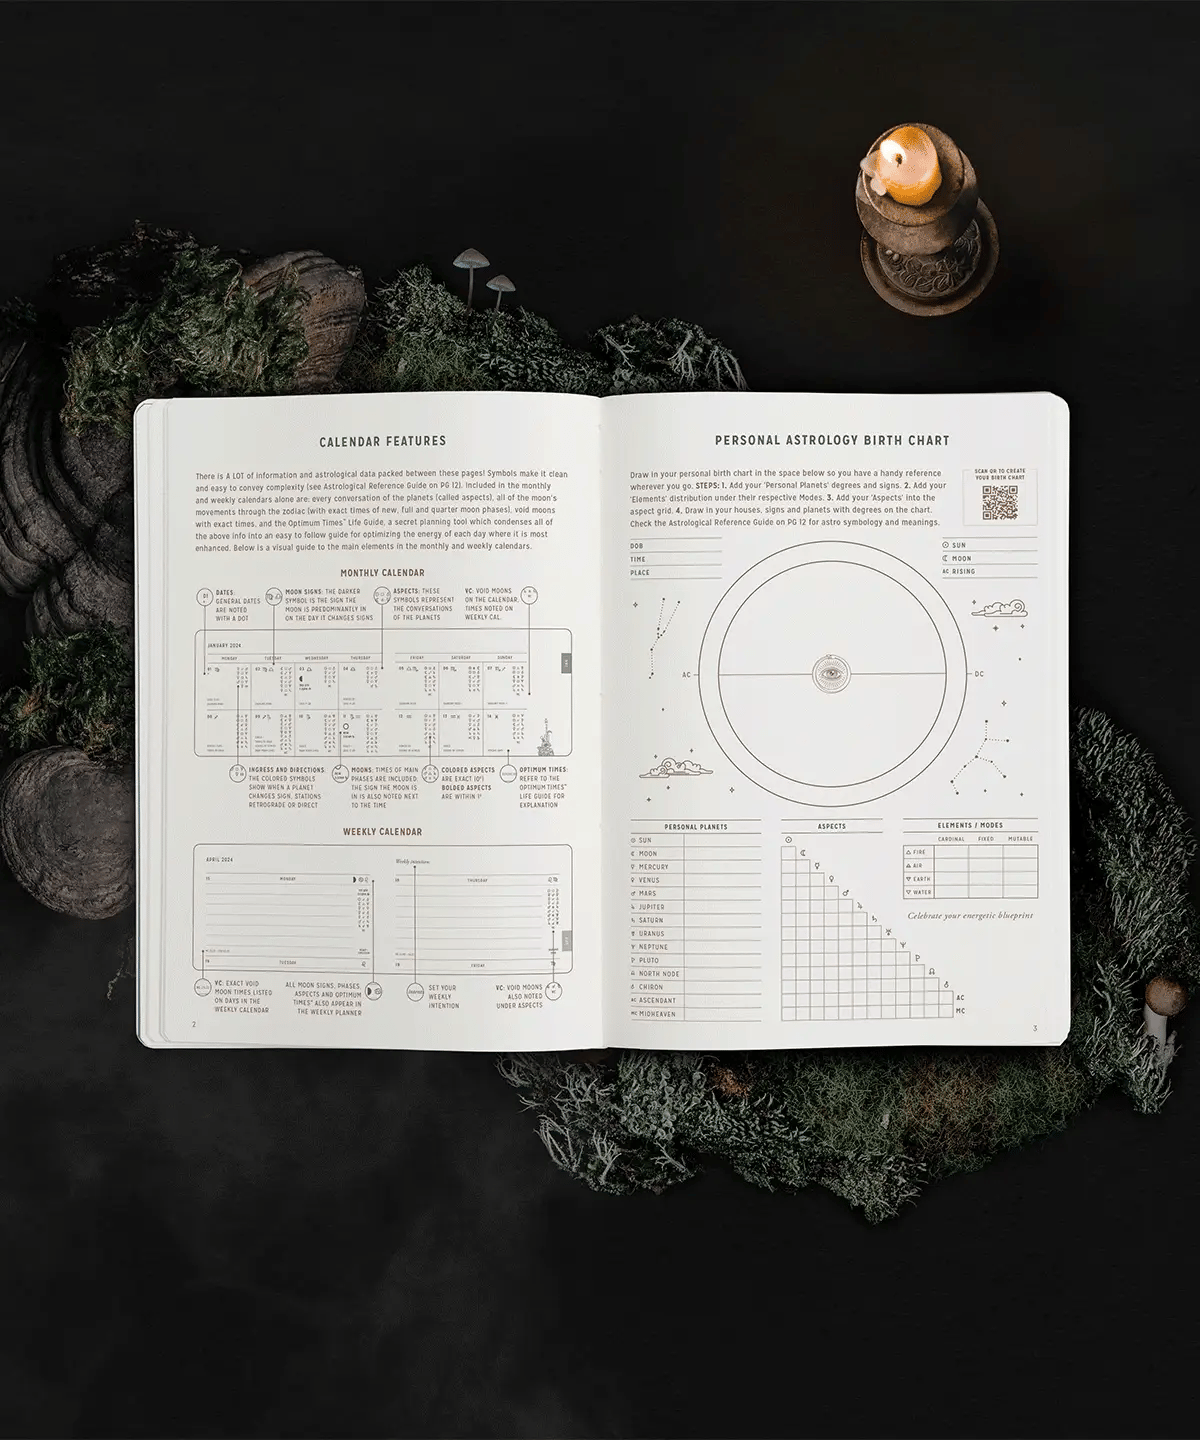 2024 Astrological Planner by Magic of I. - White